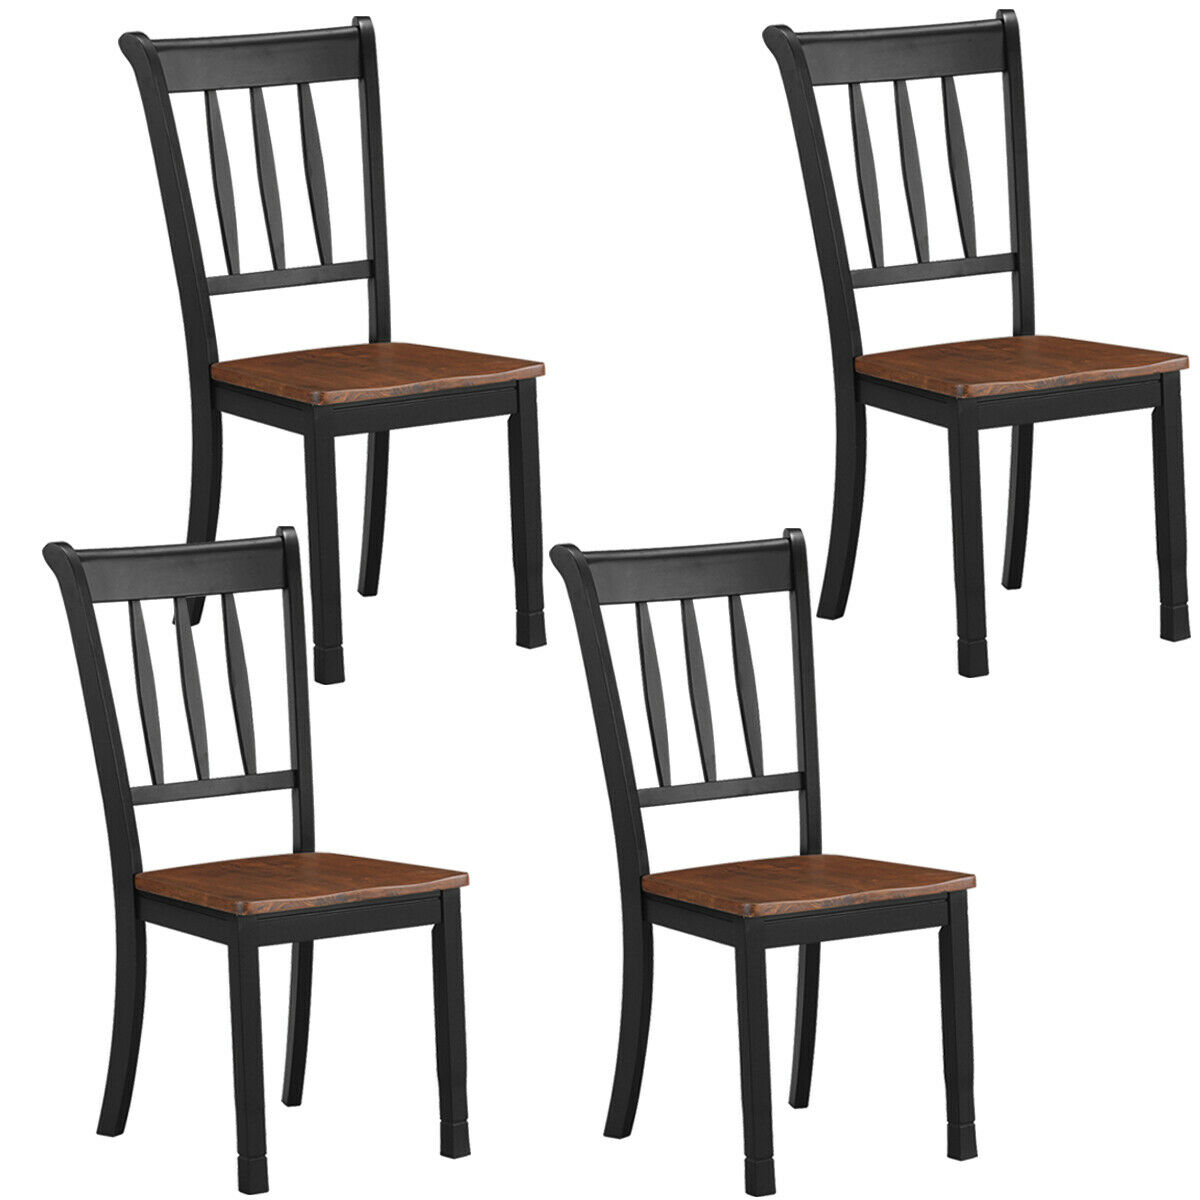 Wood Dining Chair High Back Room, High Back Dark Wood Dining Chairs